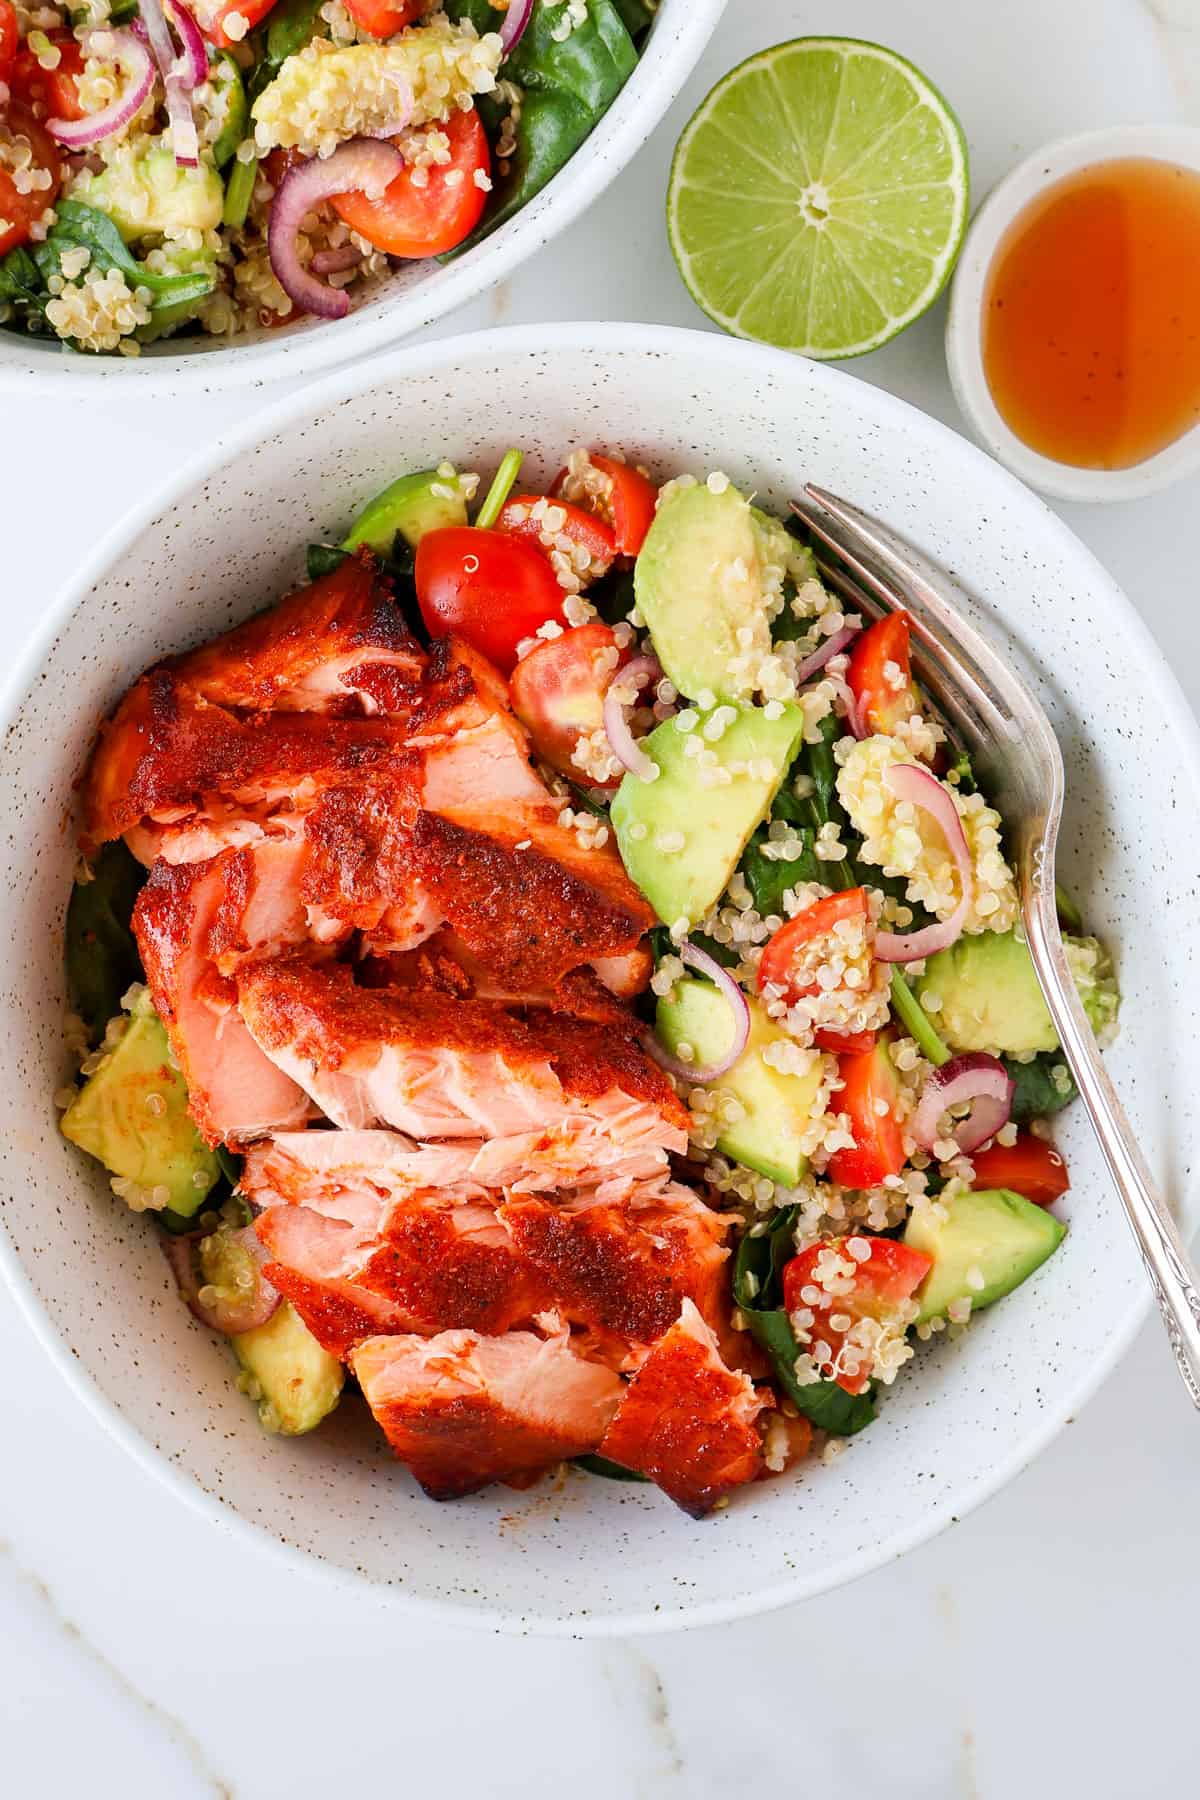 Paprika salmon filet in a bowl with a salad.